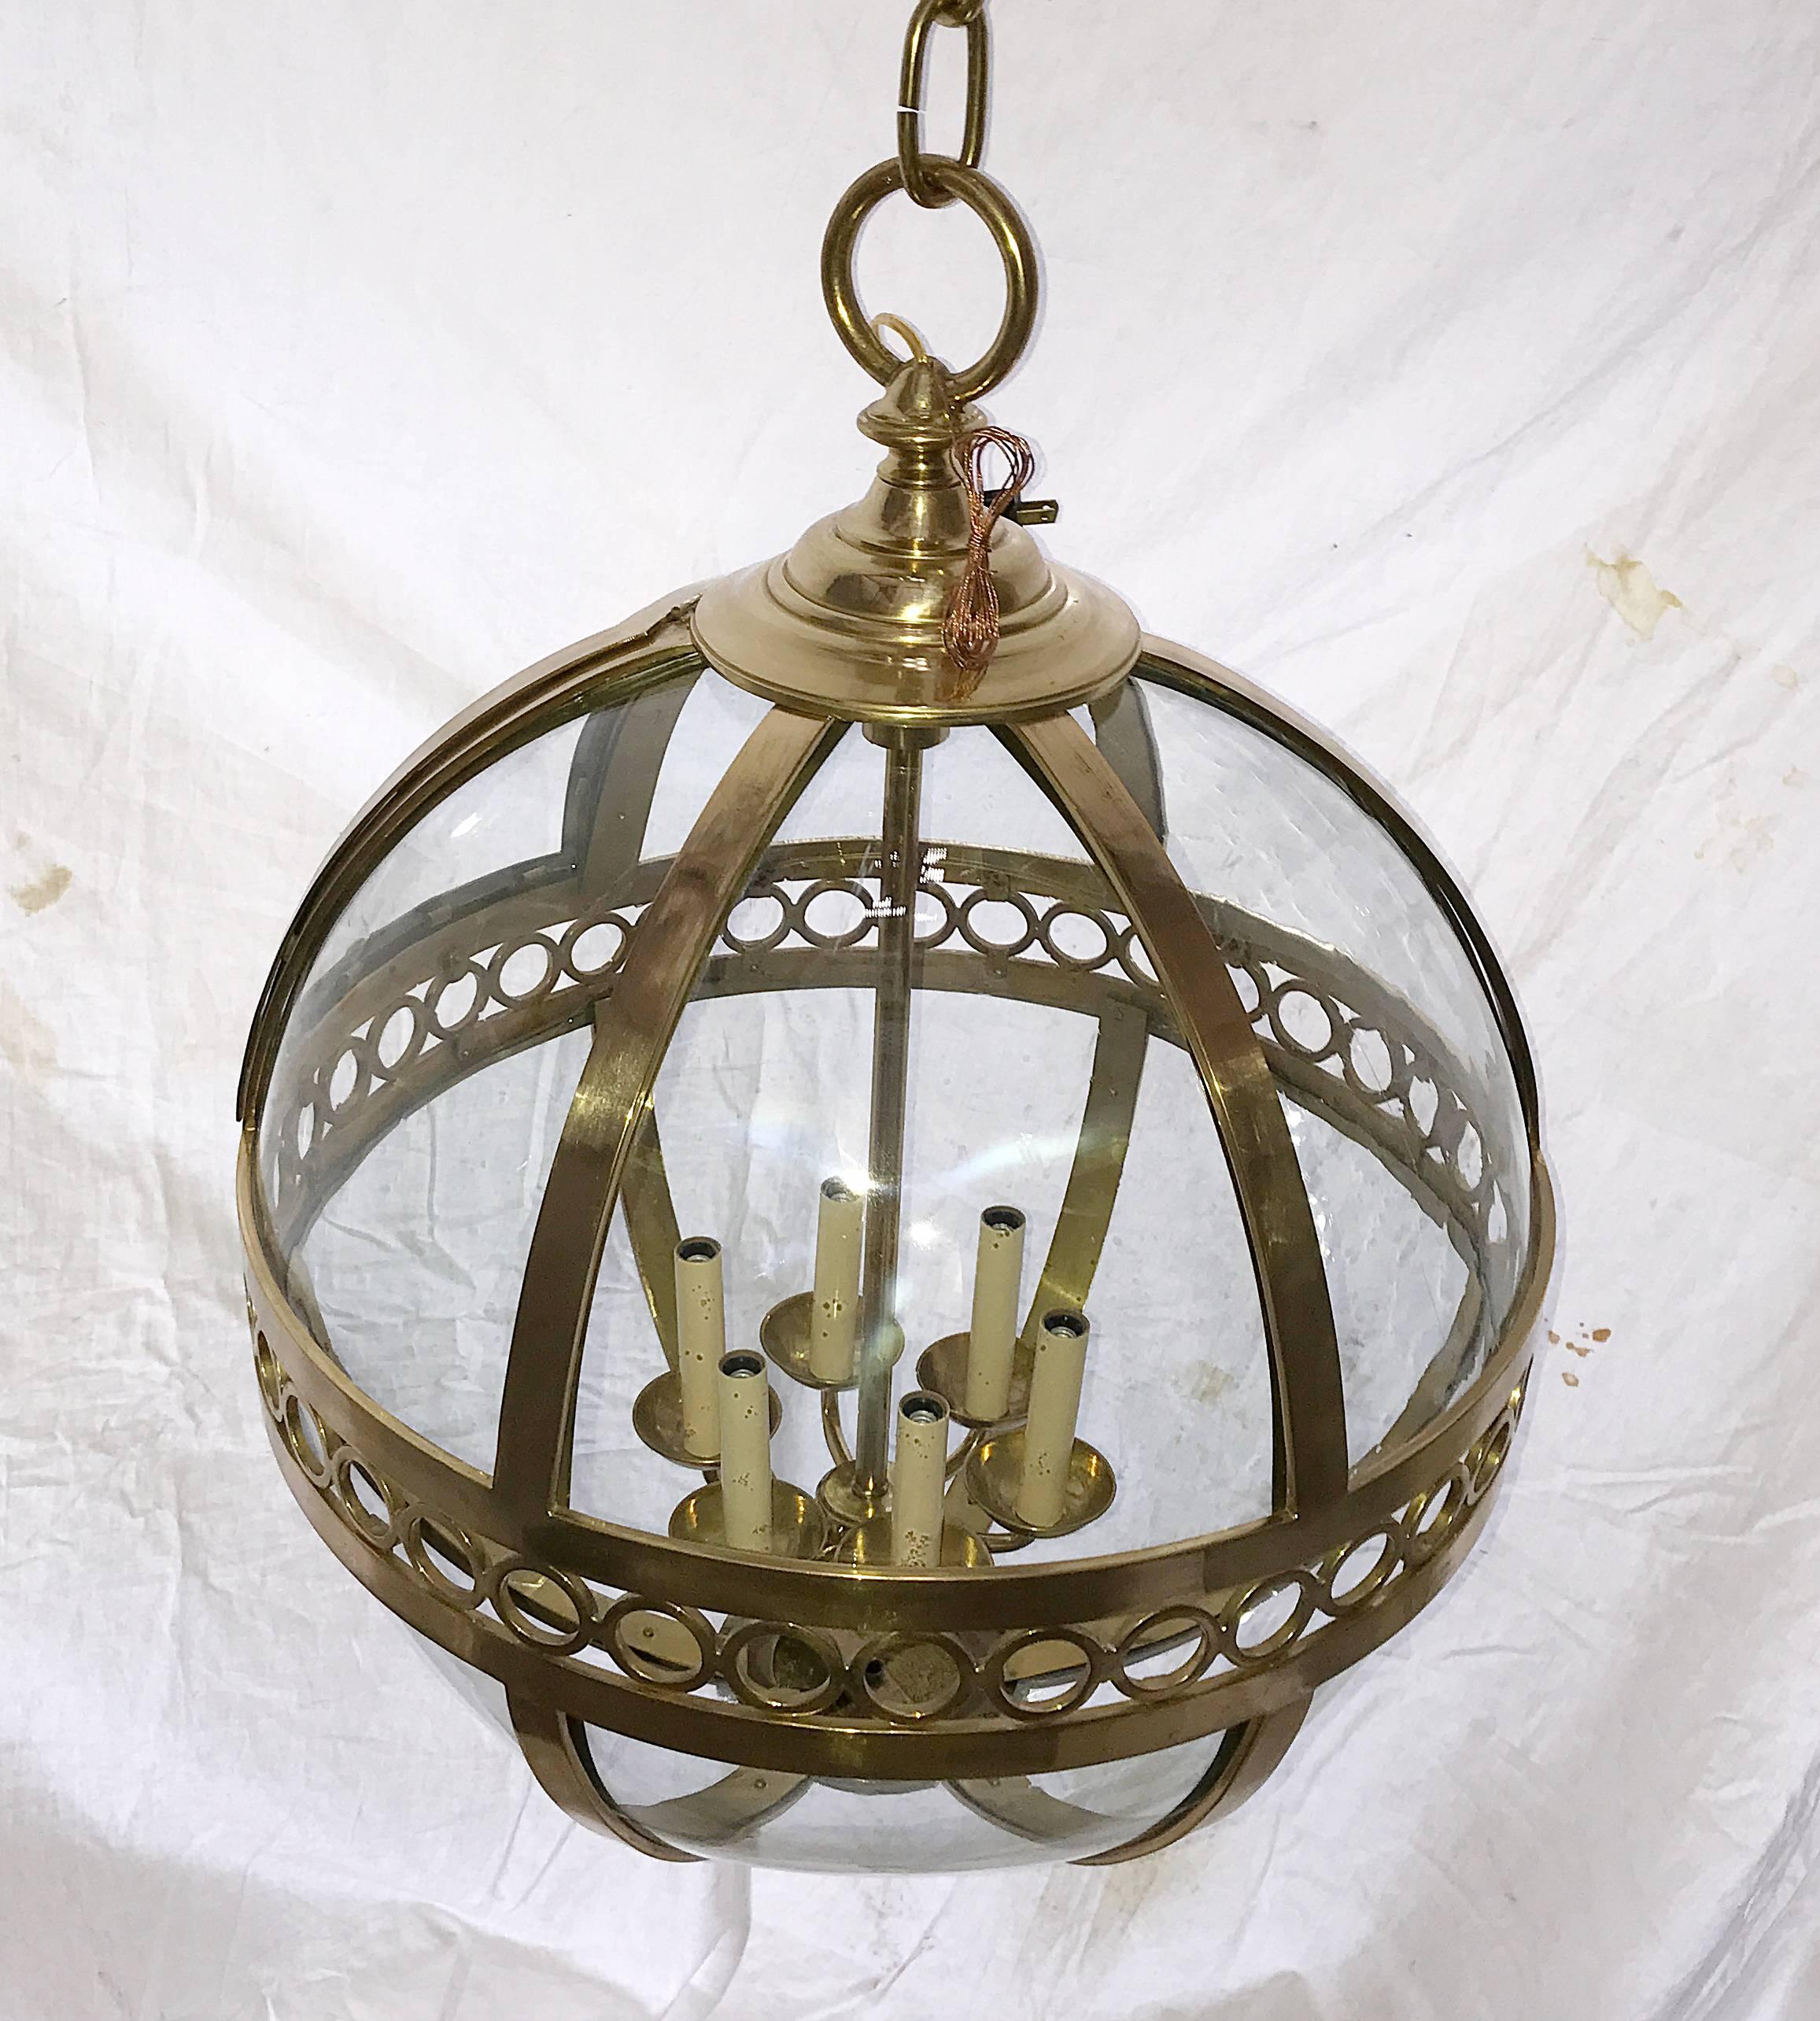 Pair of circa 1950s French bronze lanterns with molded glass insets. Six lights.
Measures: Diameter 24